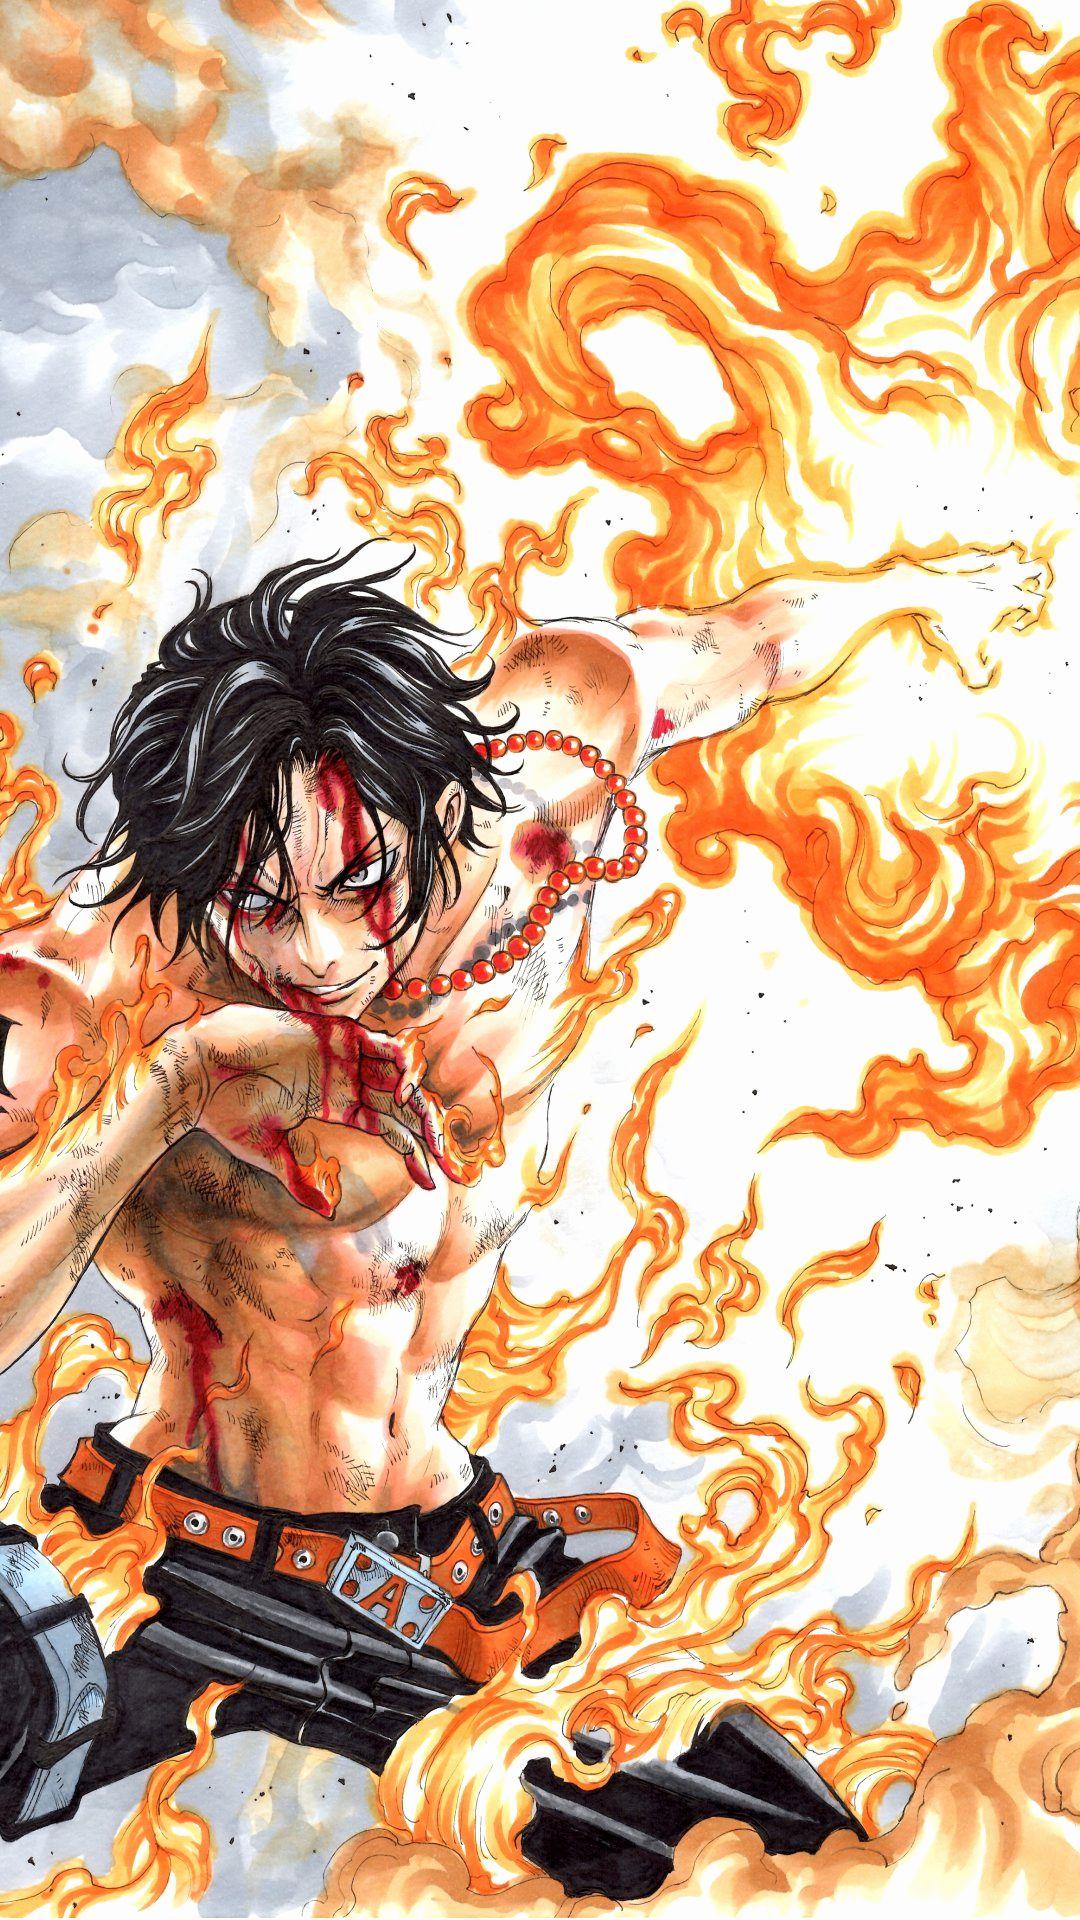 One Piece Wallpaper - One Piece Wallpaper 4k Android - 1080x1920 Wallpaper  